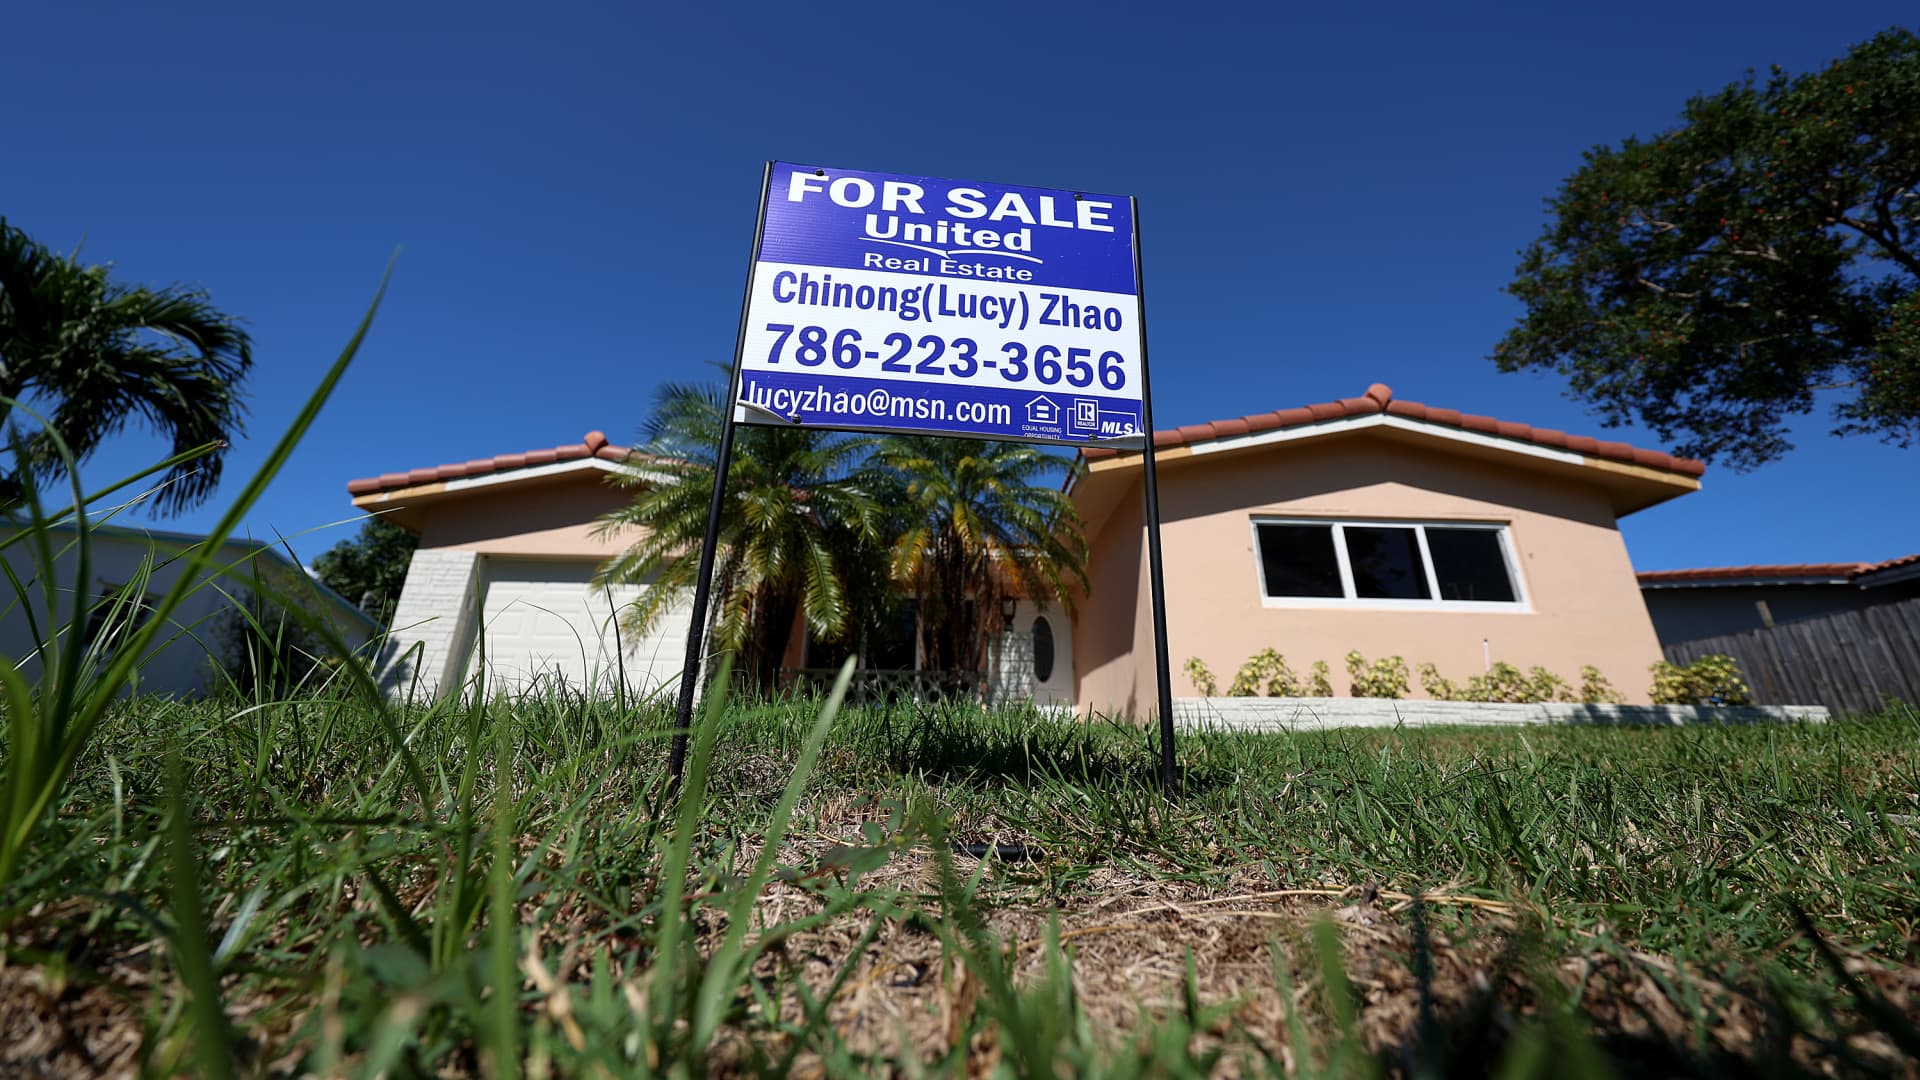 Mortgage refinance demand jumps 18% as interest rates drop for the fifth straight week